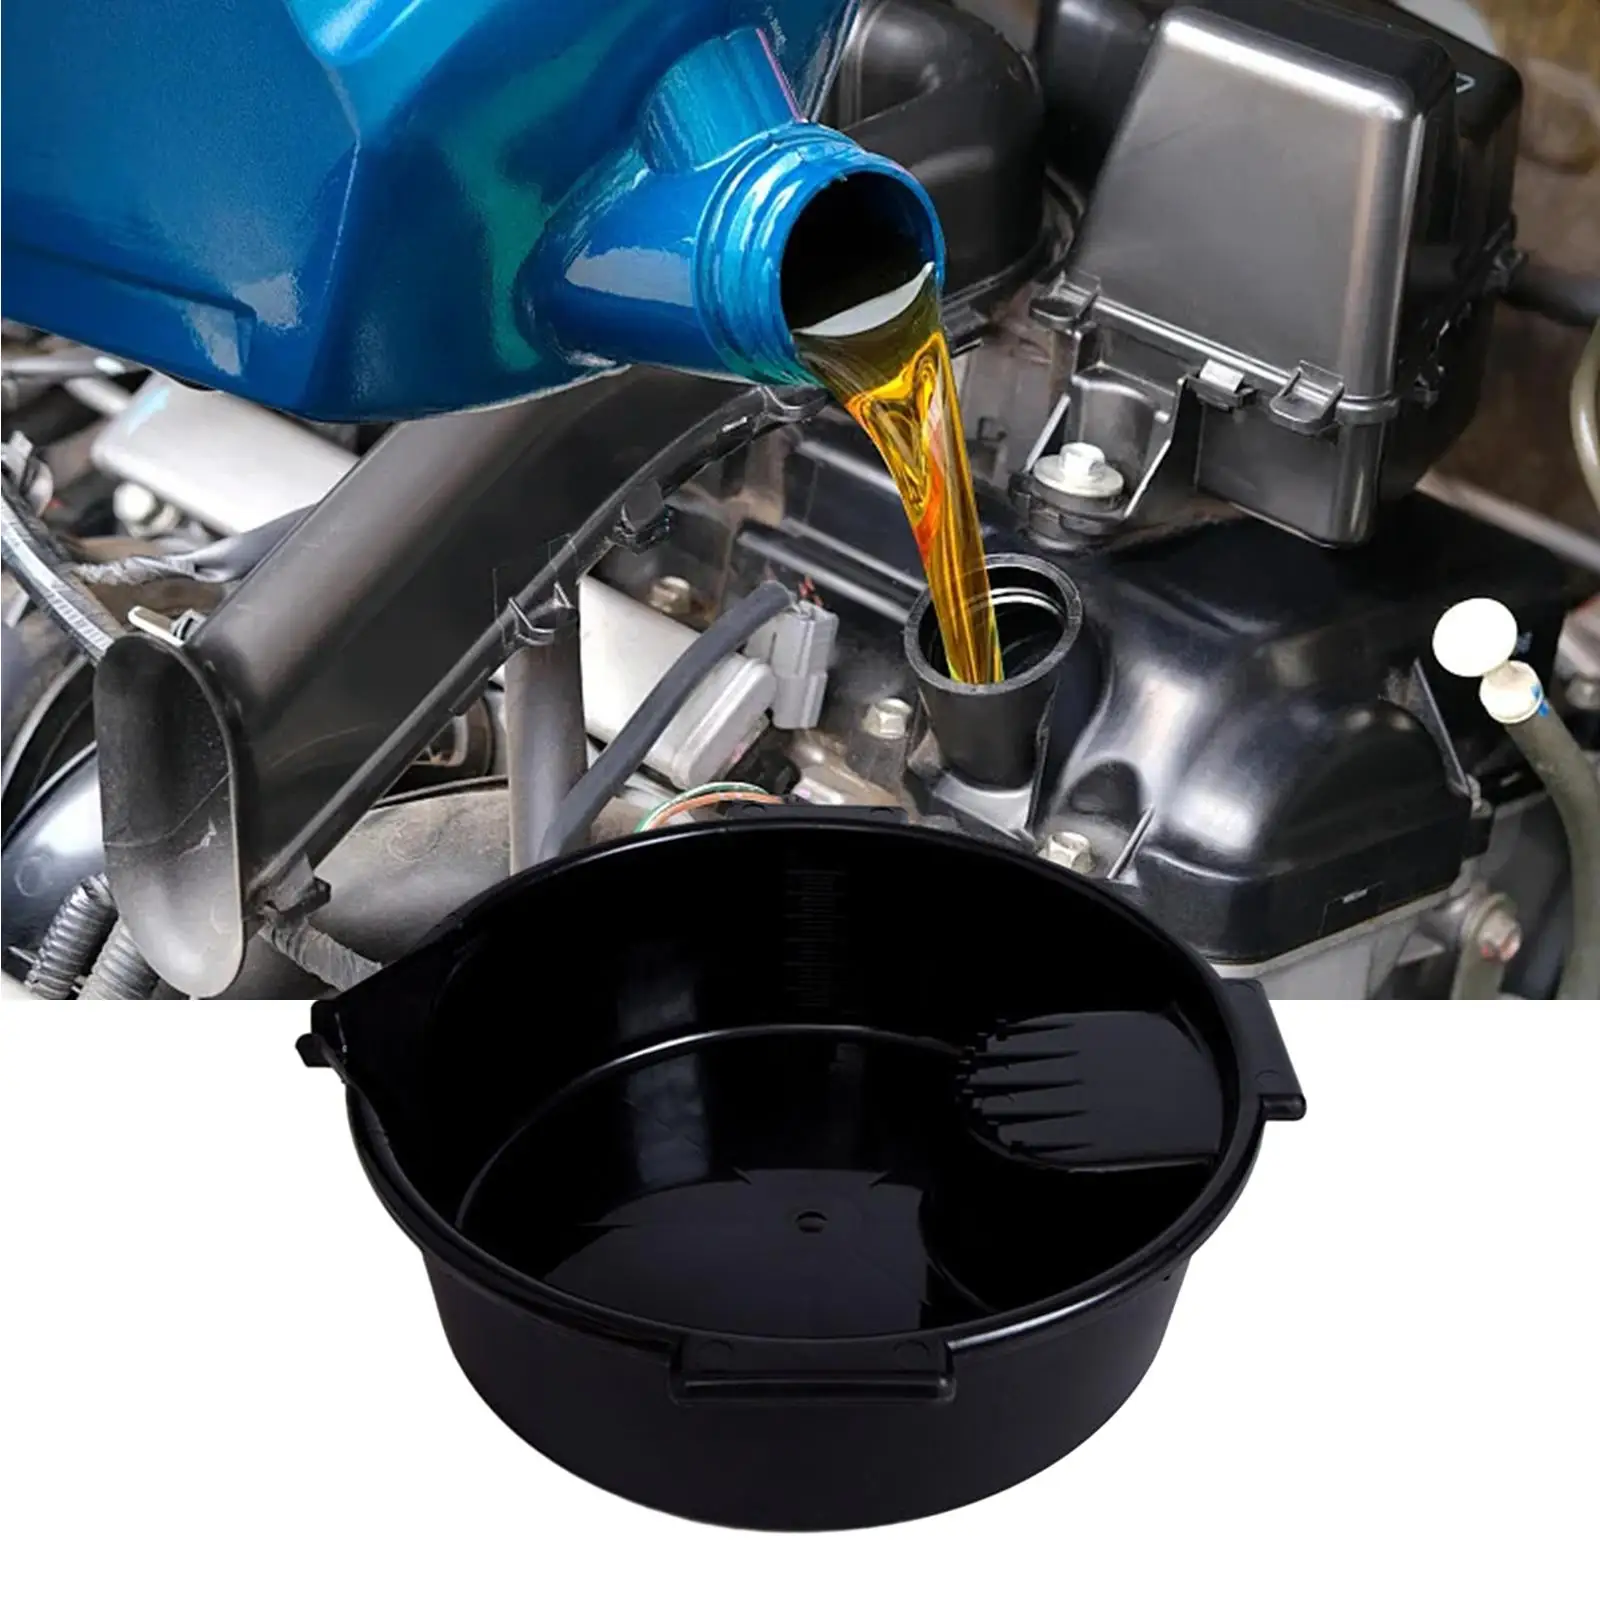 Drain Pan Automobile Accessories Oil Resistant Garage Tool Easy Cleaning Durable